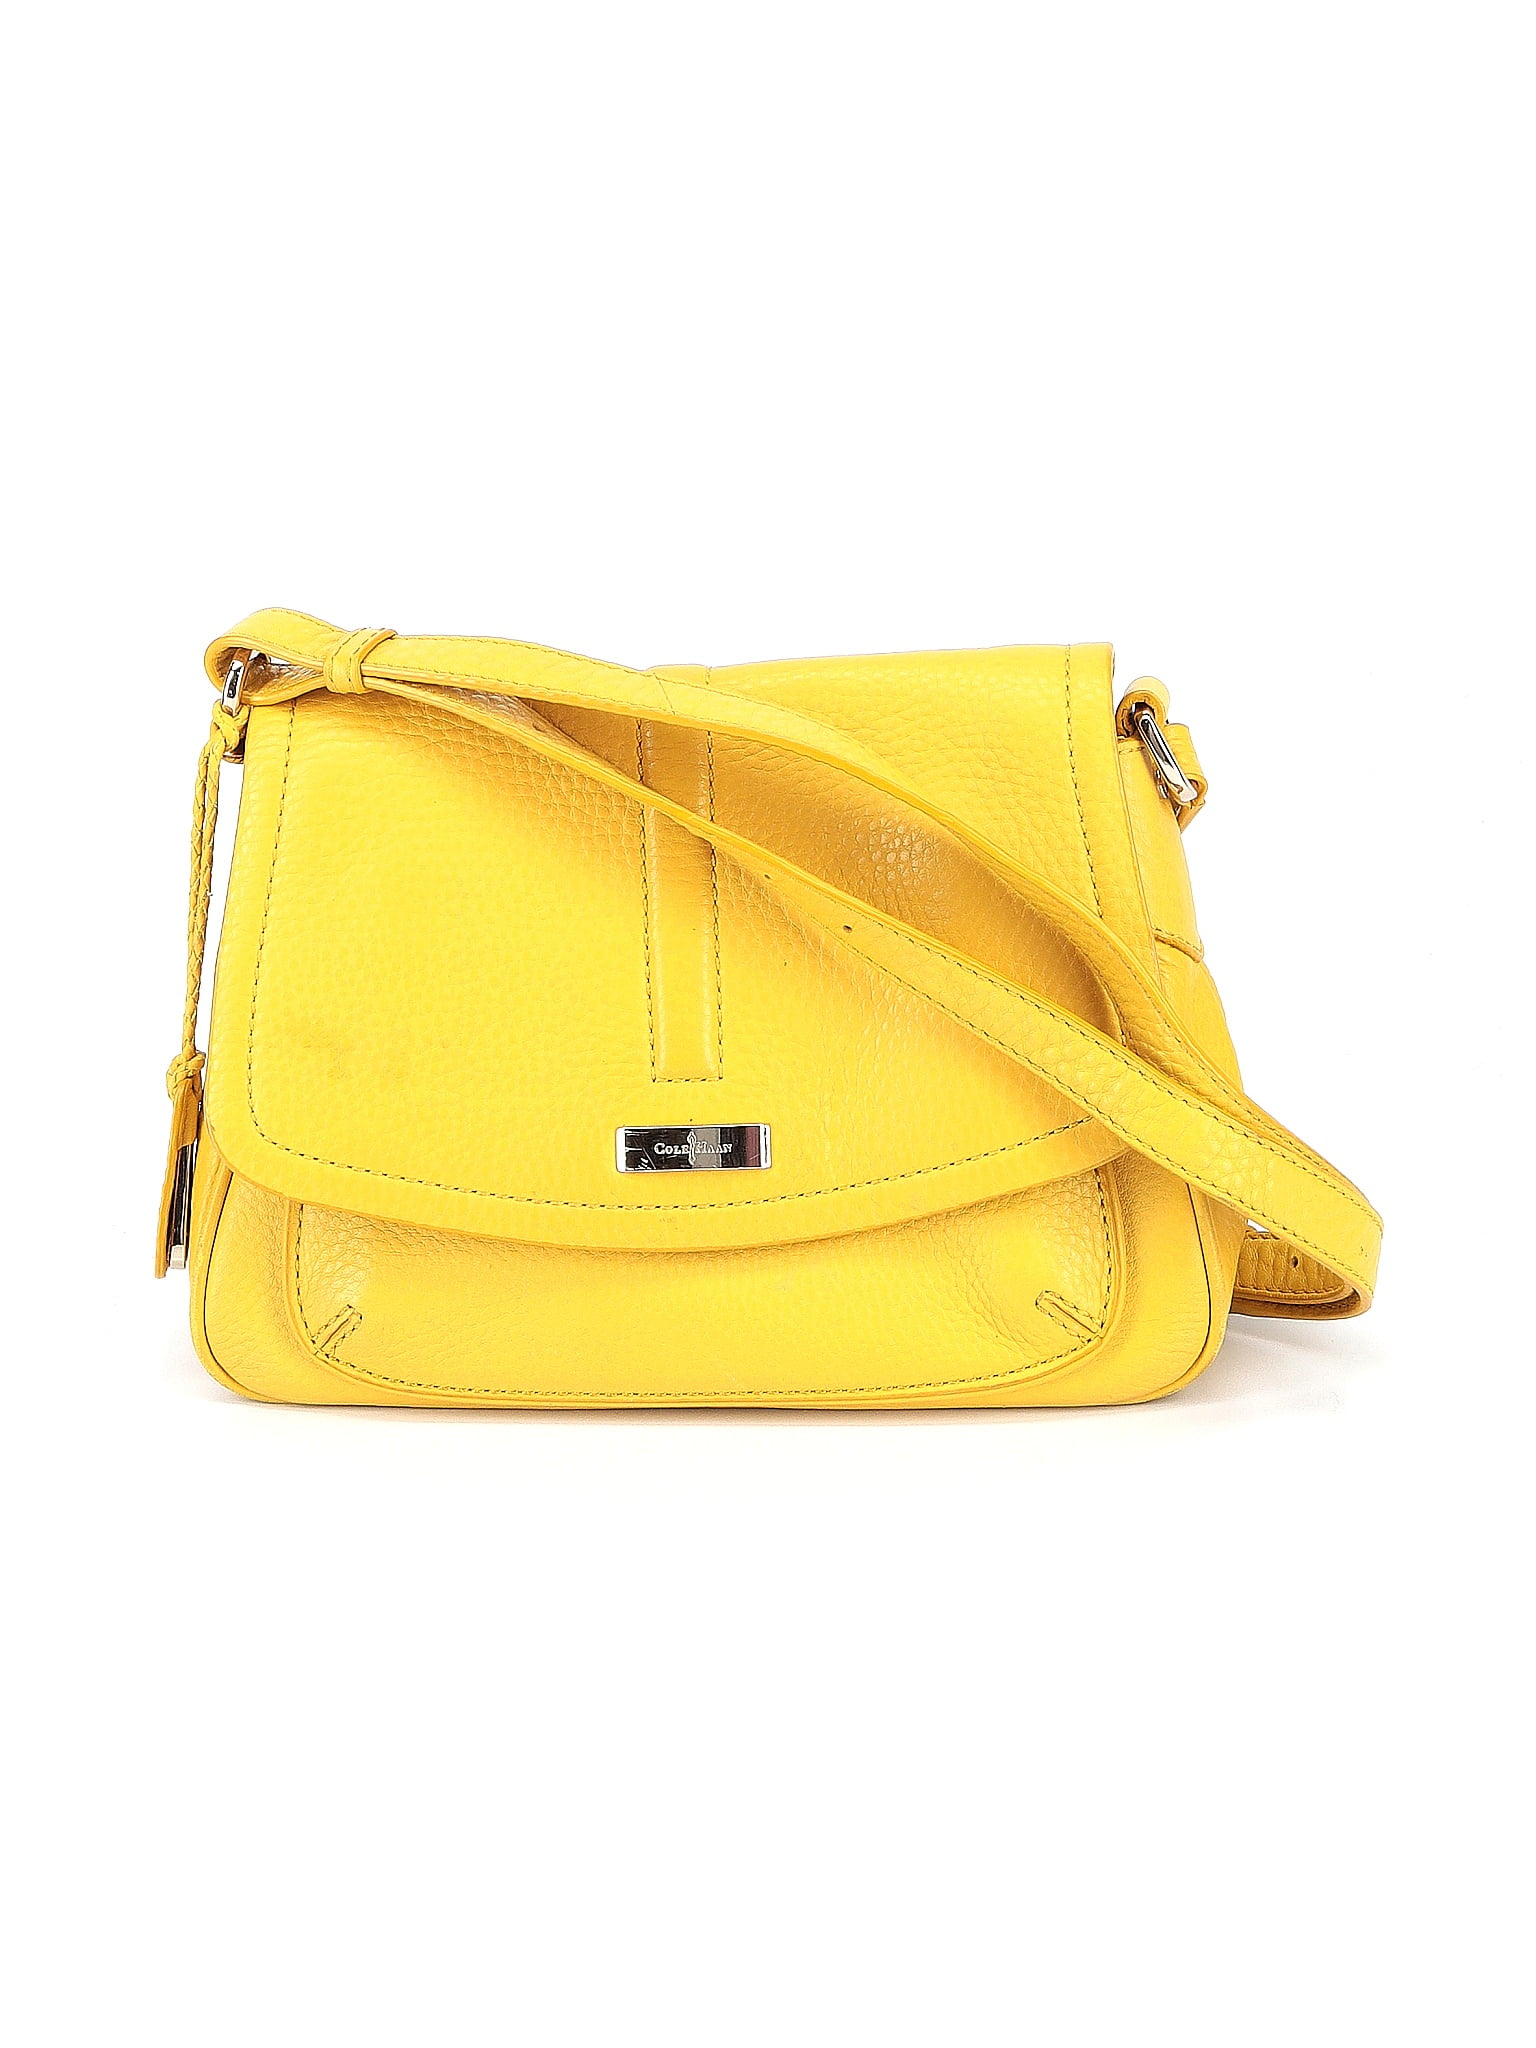 Cole Haan 100% Leather Solid Yellow Leather Shoulder Bag One Size - 74% ...